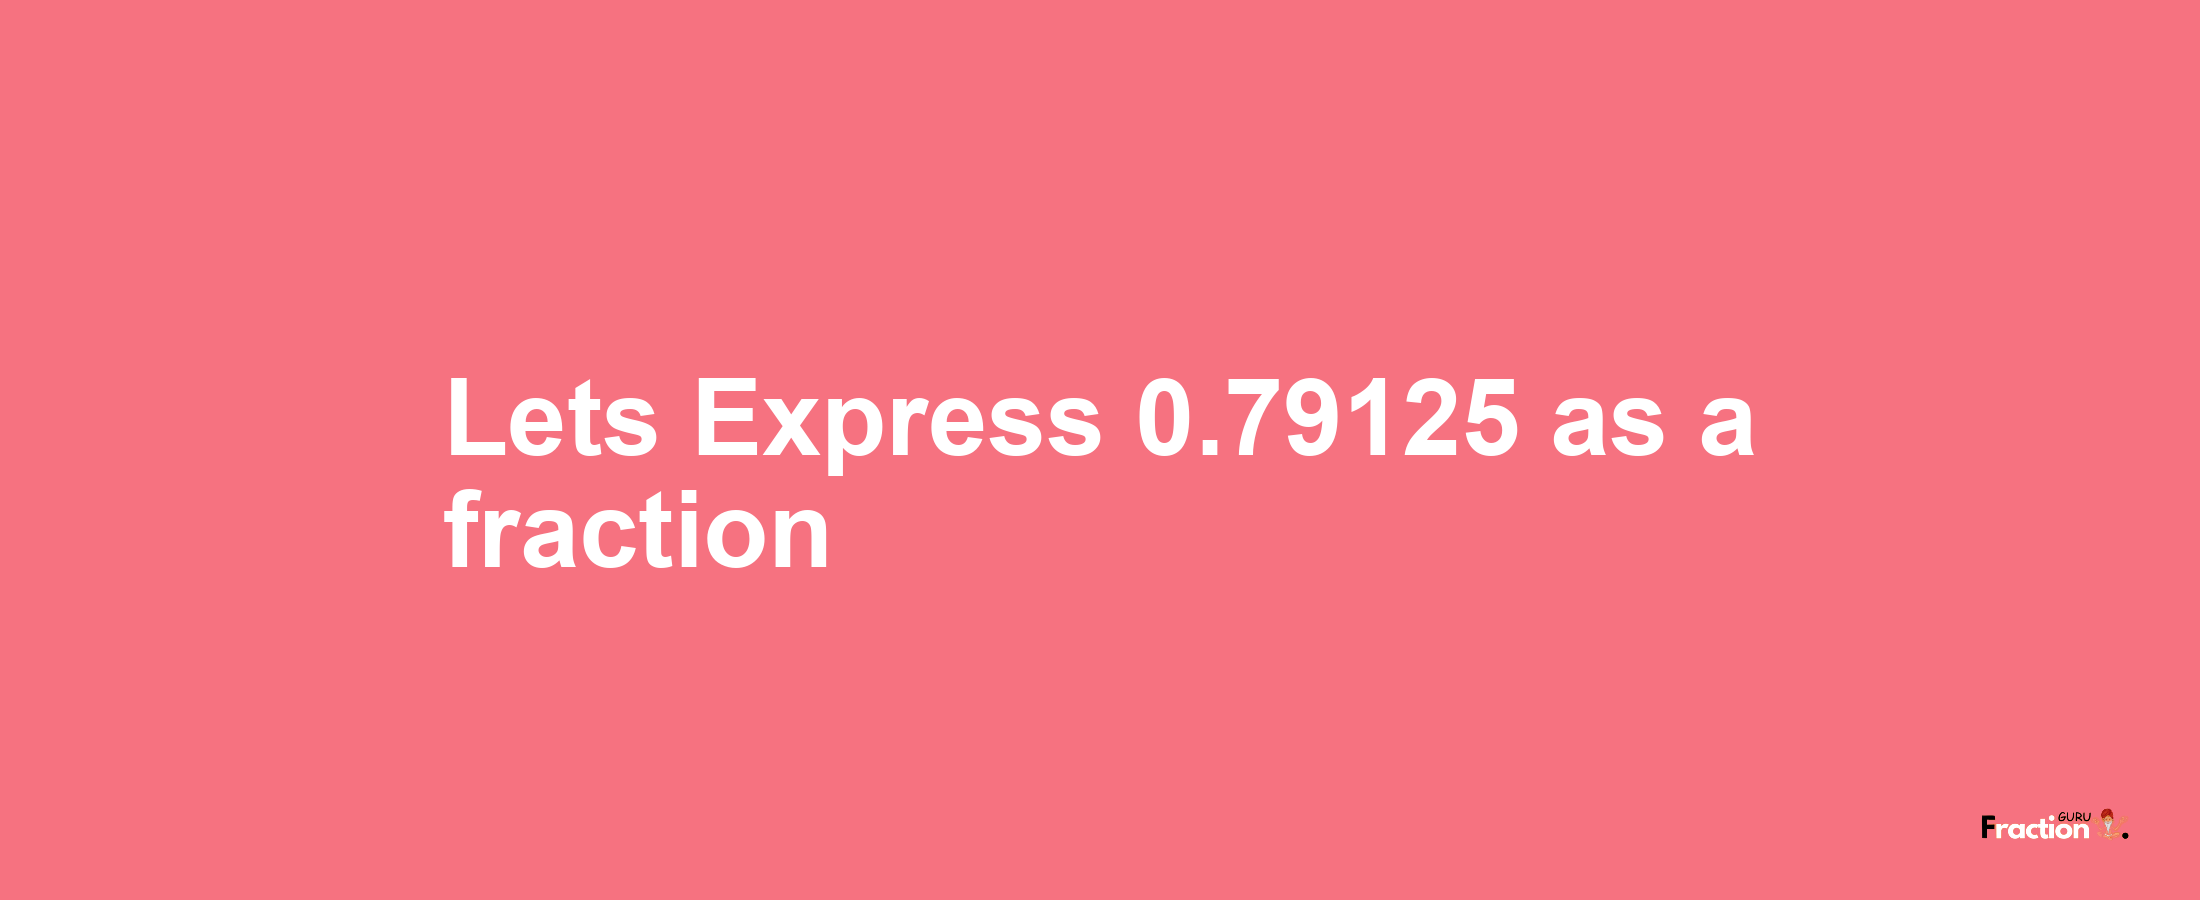 Lets Express 0.79125 as afraction